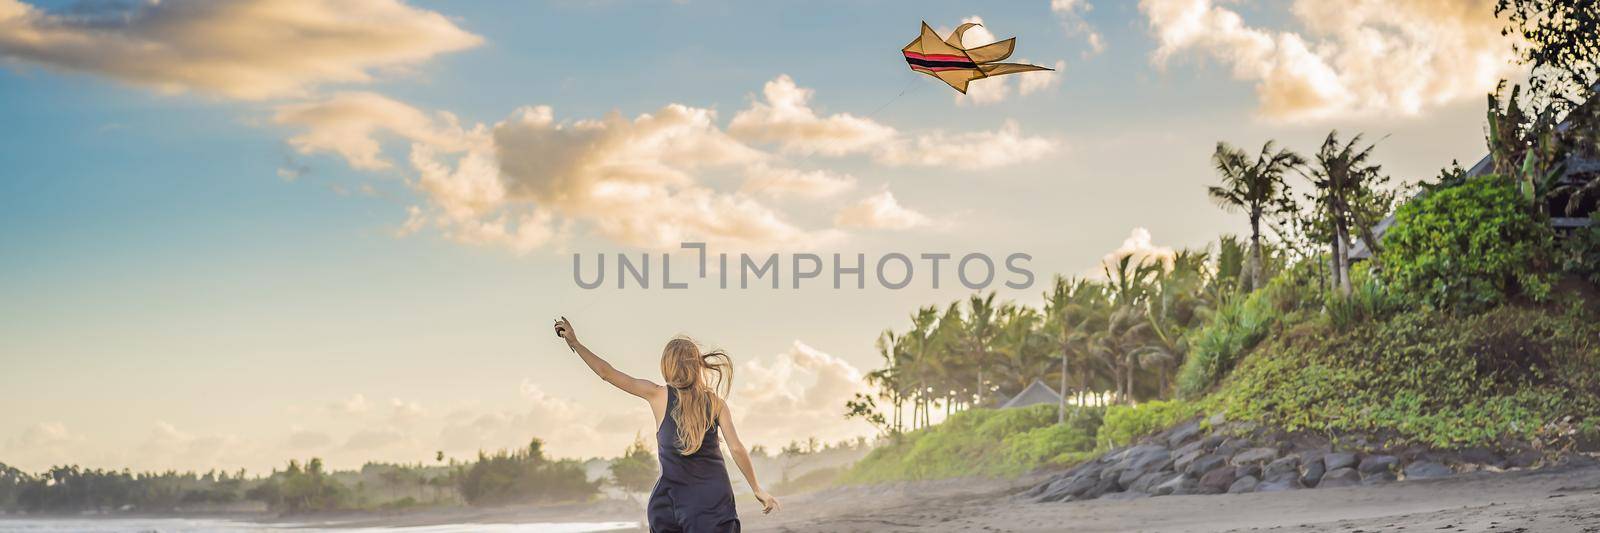 A young woman launches a kite on the beach. Dream, aspirations, future plans BANNER, LONG FORMAT by galitskaya